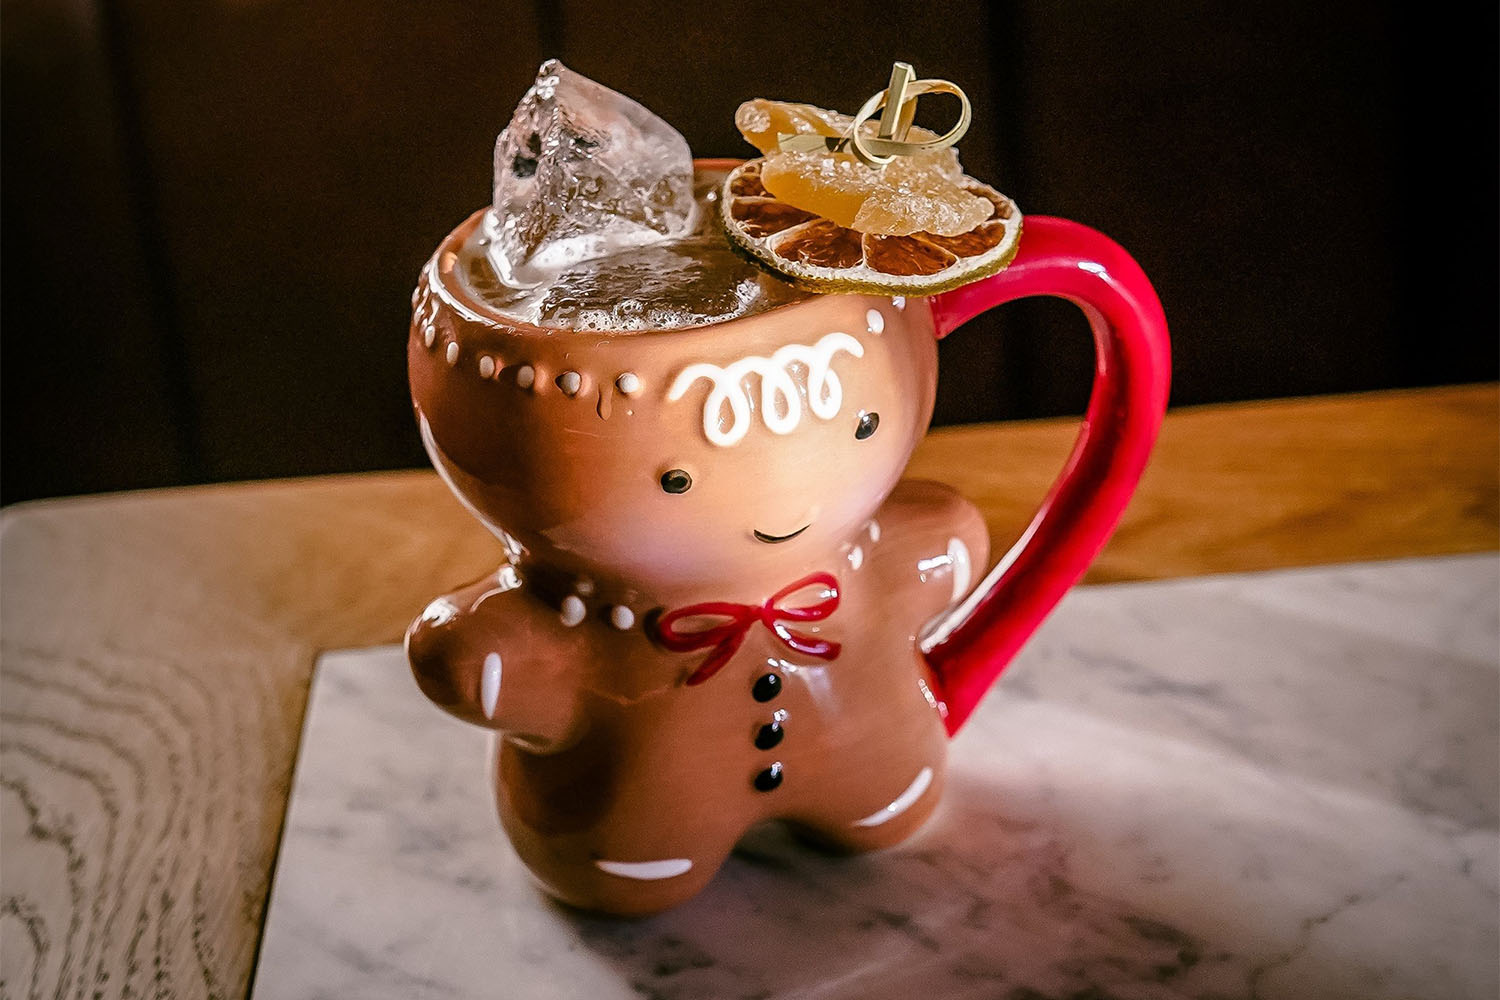 Cocktail in a mug shaped like a gingerbread man cookie